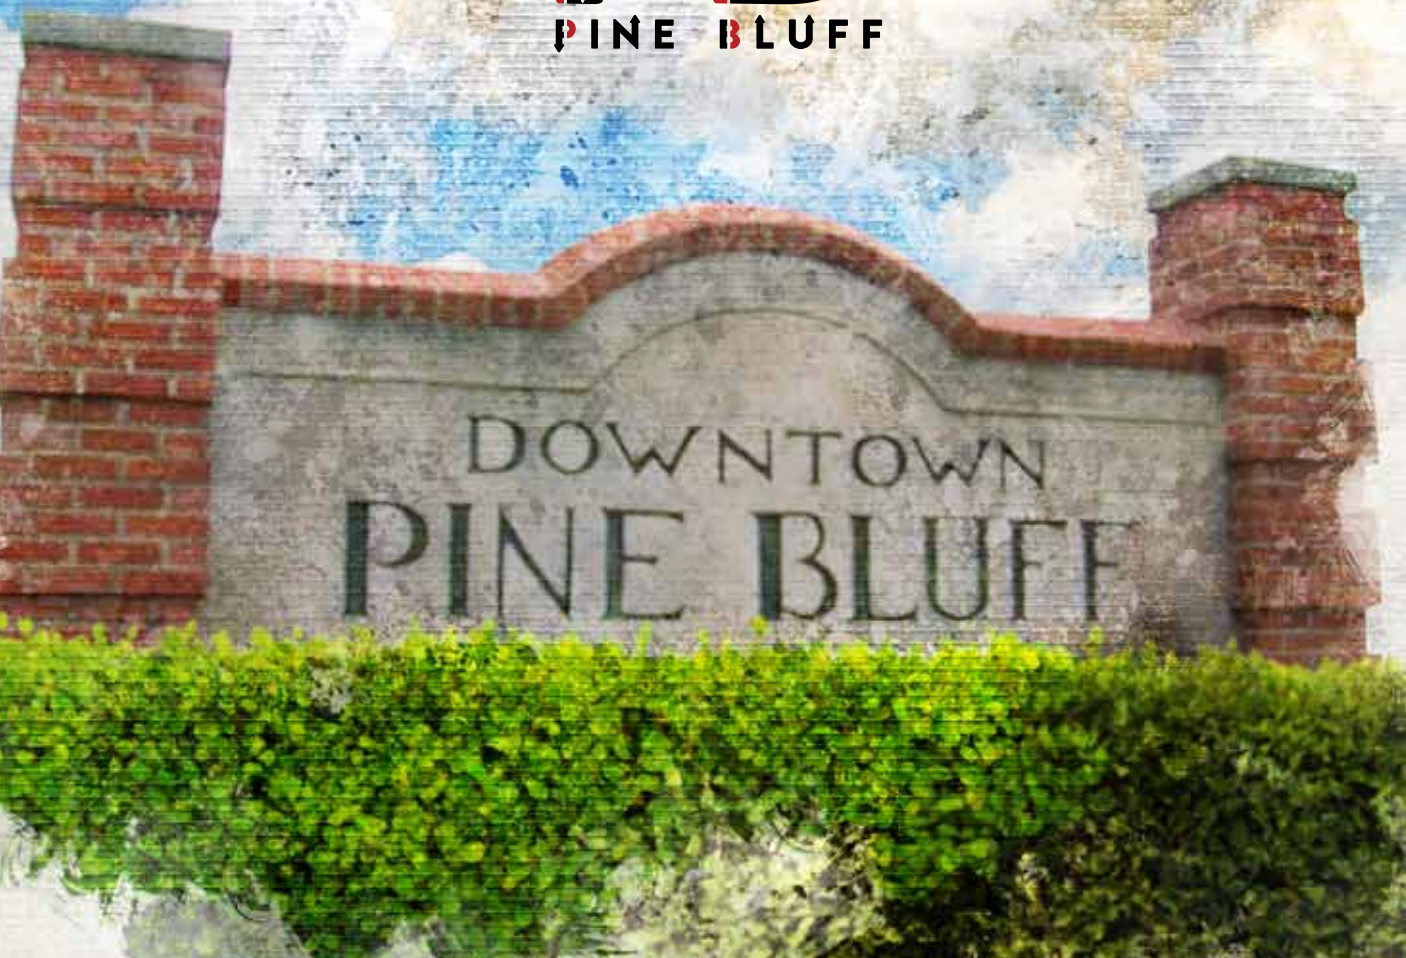 downtown pine bluff sign